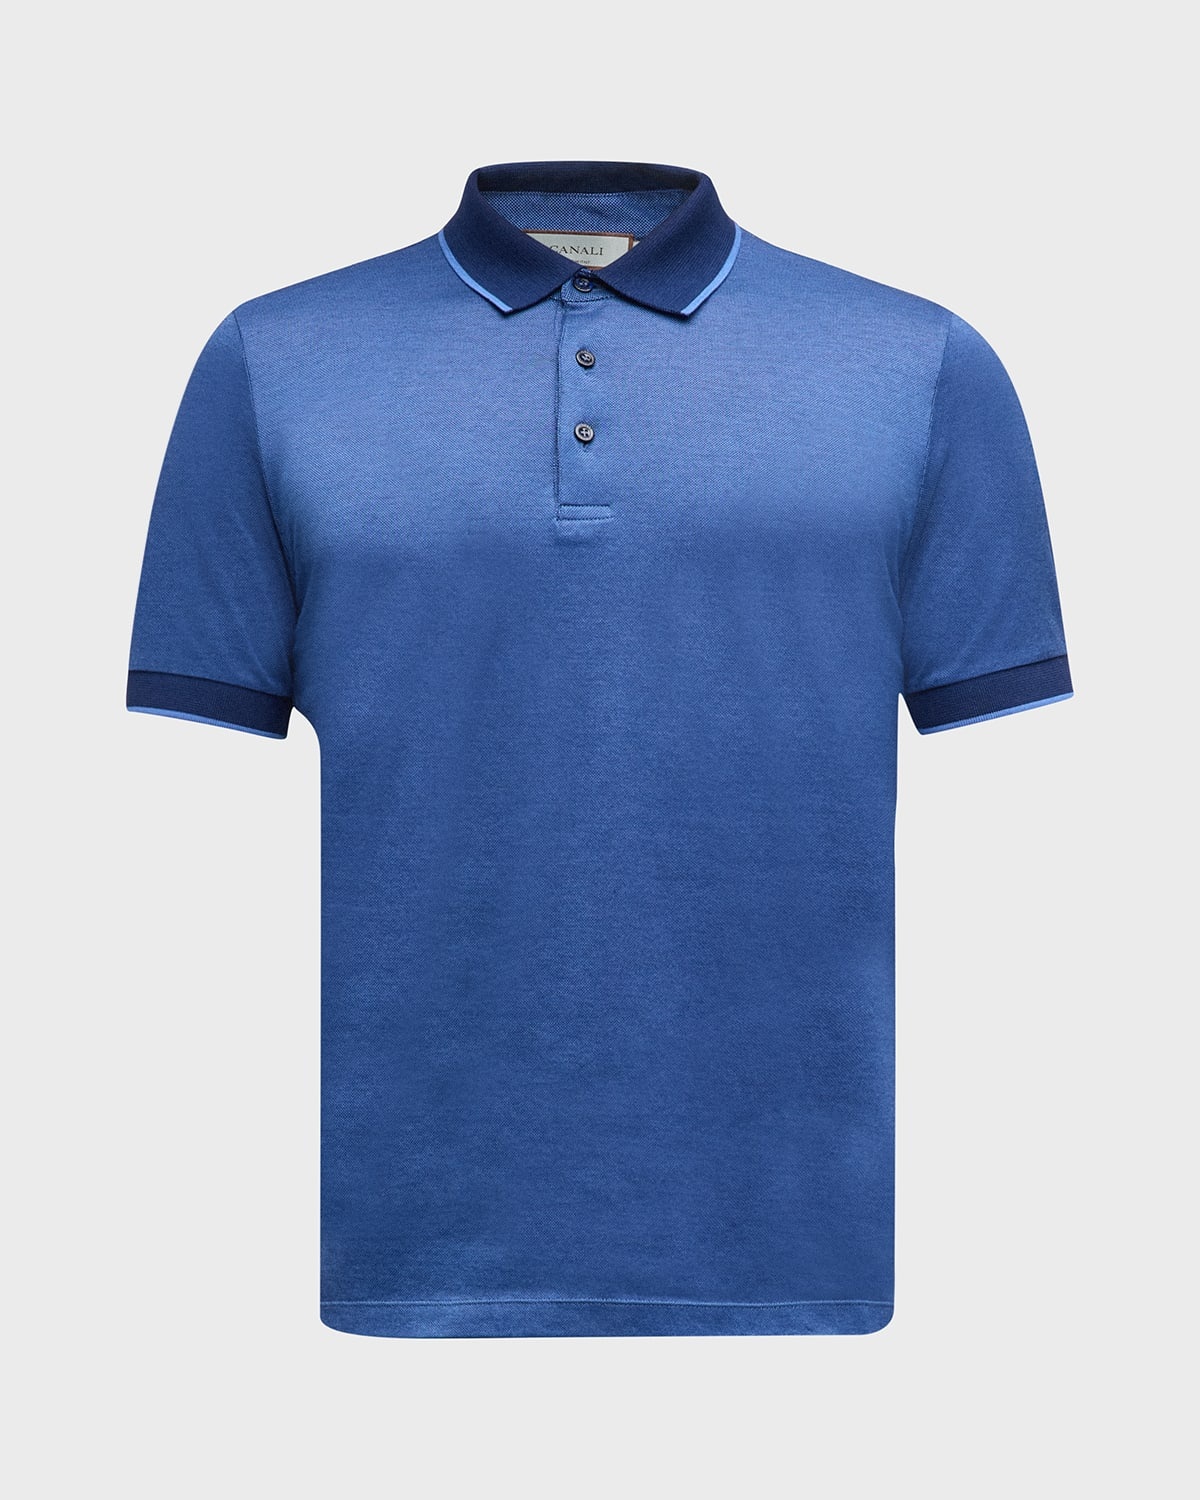 Men's Cotton Polo Shirt with Tipping - 1